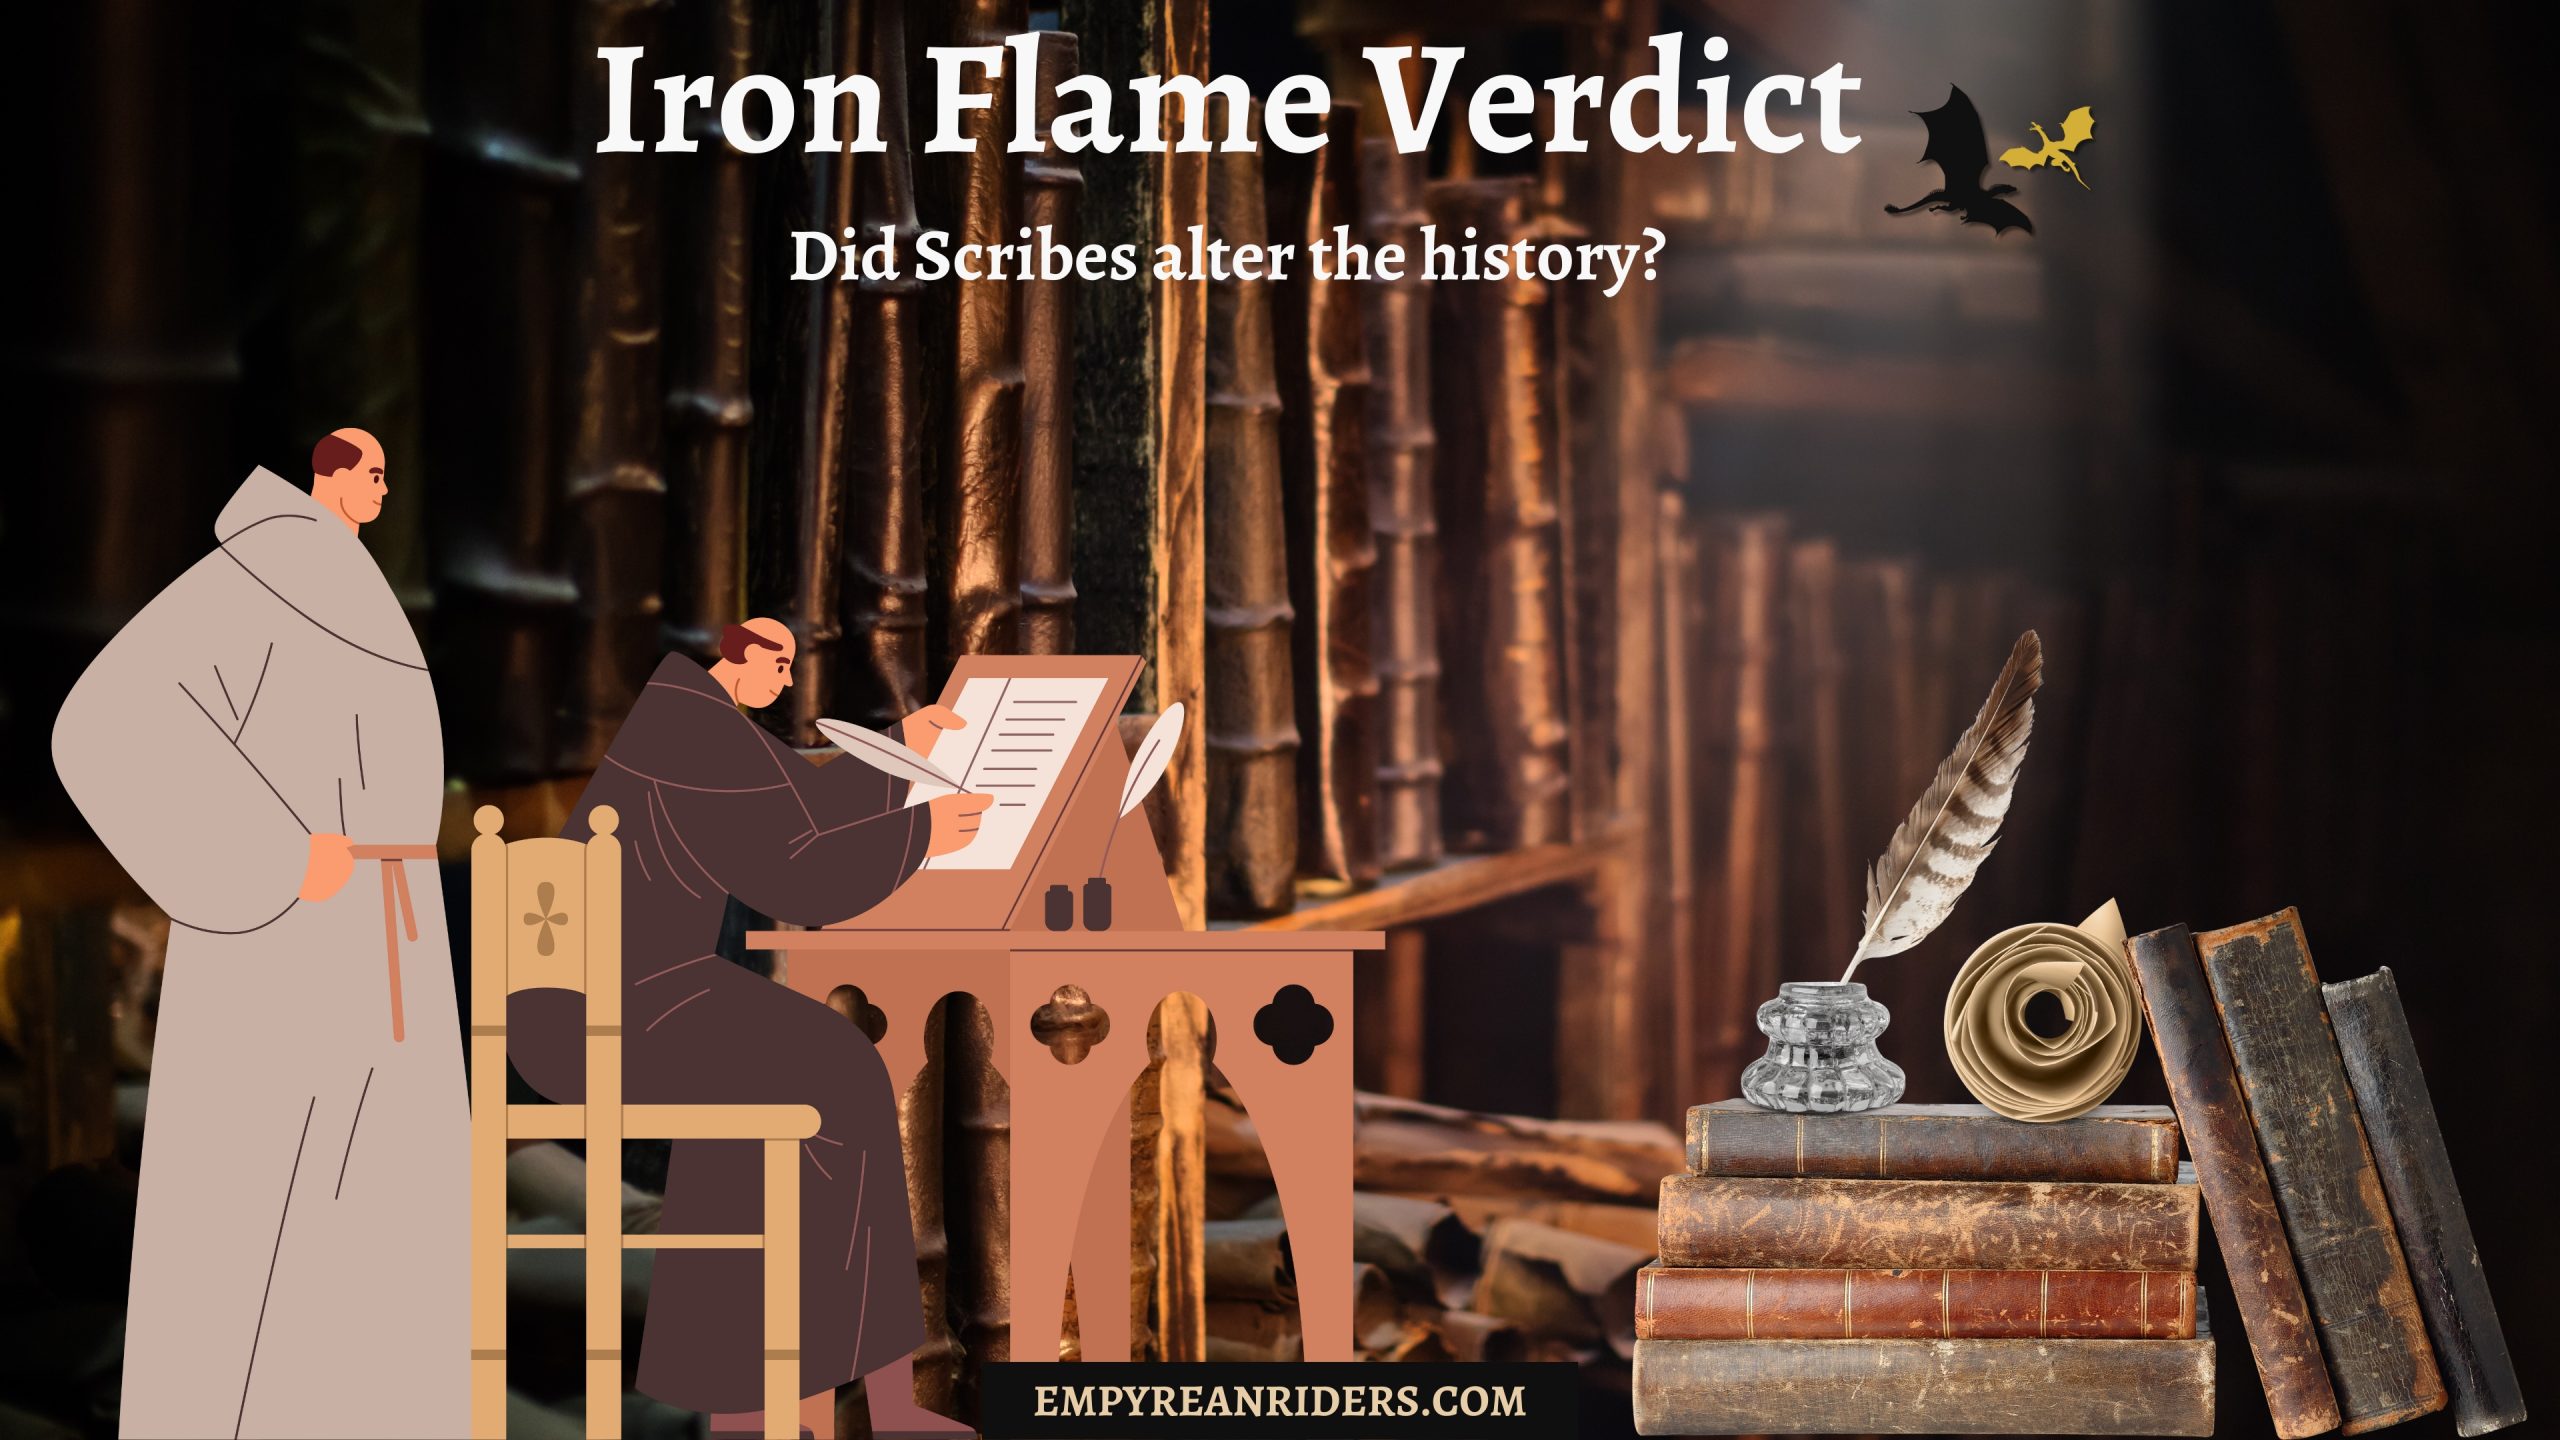 Iron Flame Verdict: Did Scribes alter the history?